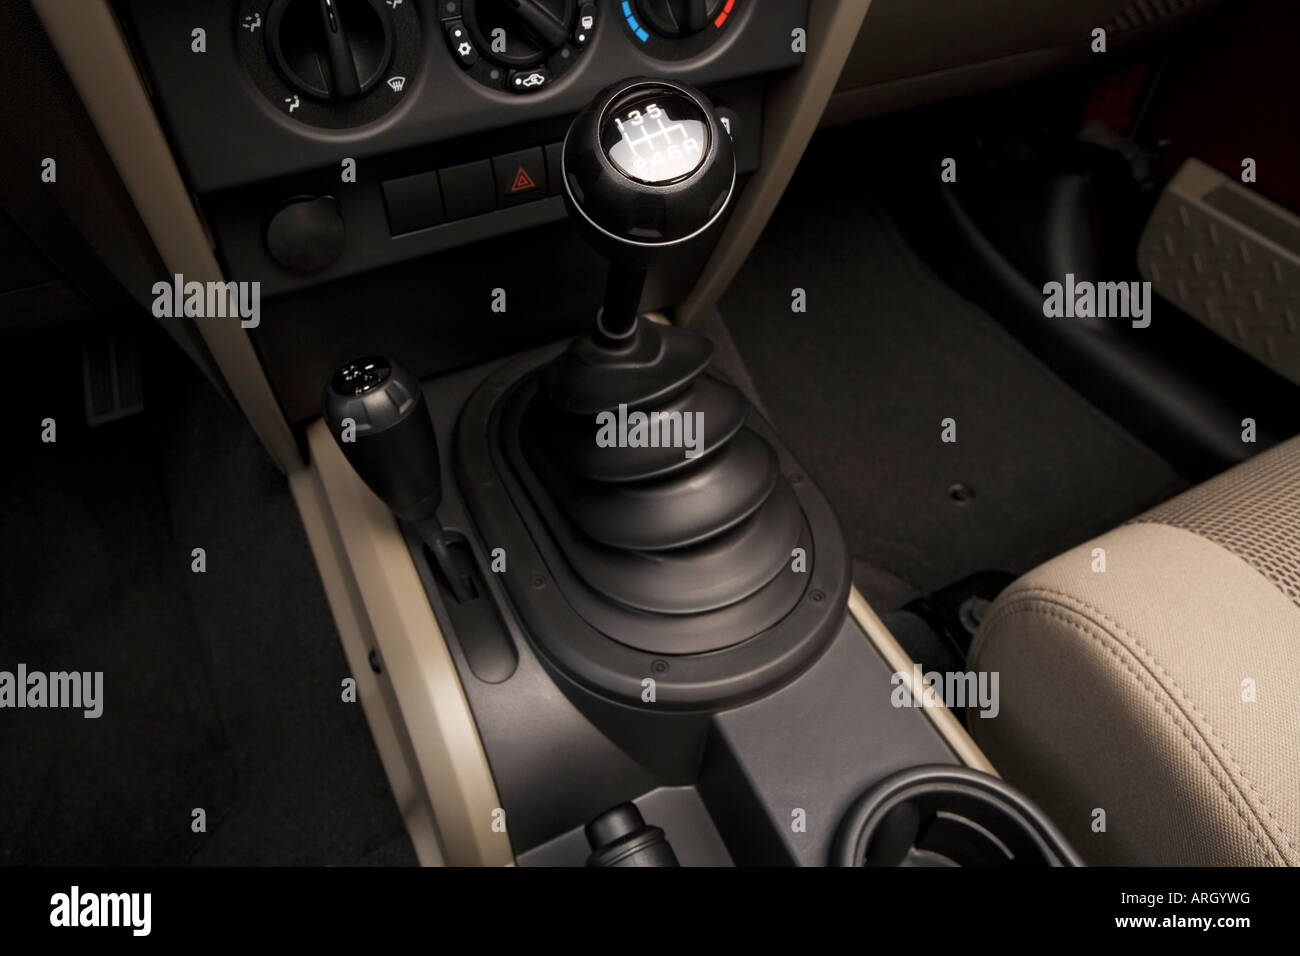 2007 Jeep Wrangler Unlimited Sahara in Red - Gear shifter/center console  Stock Photo - Alamy